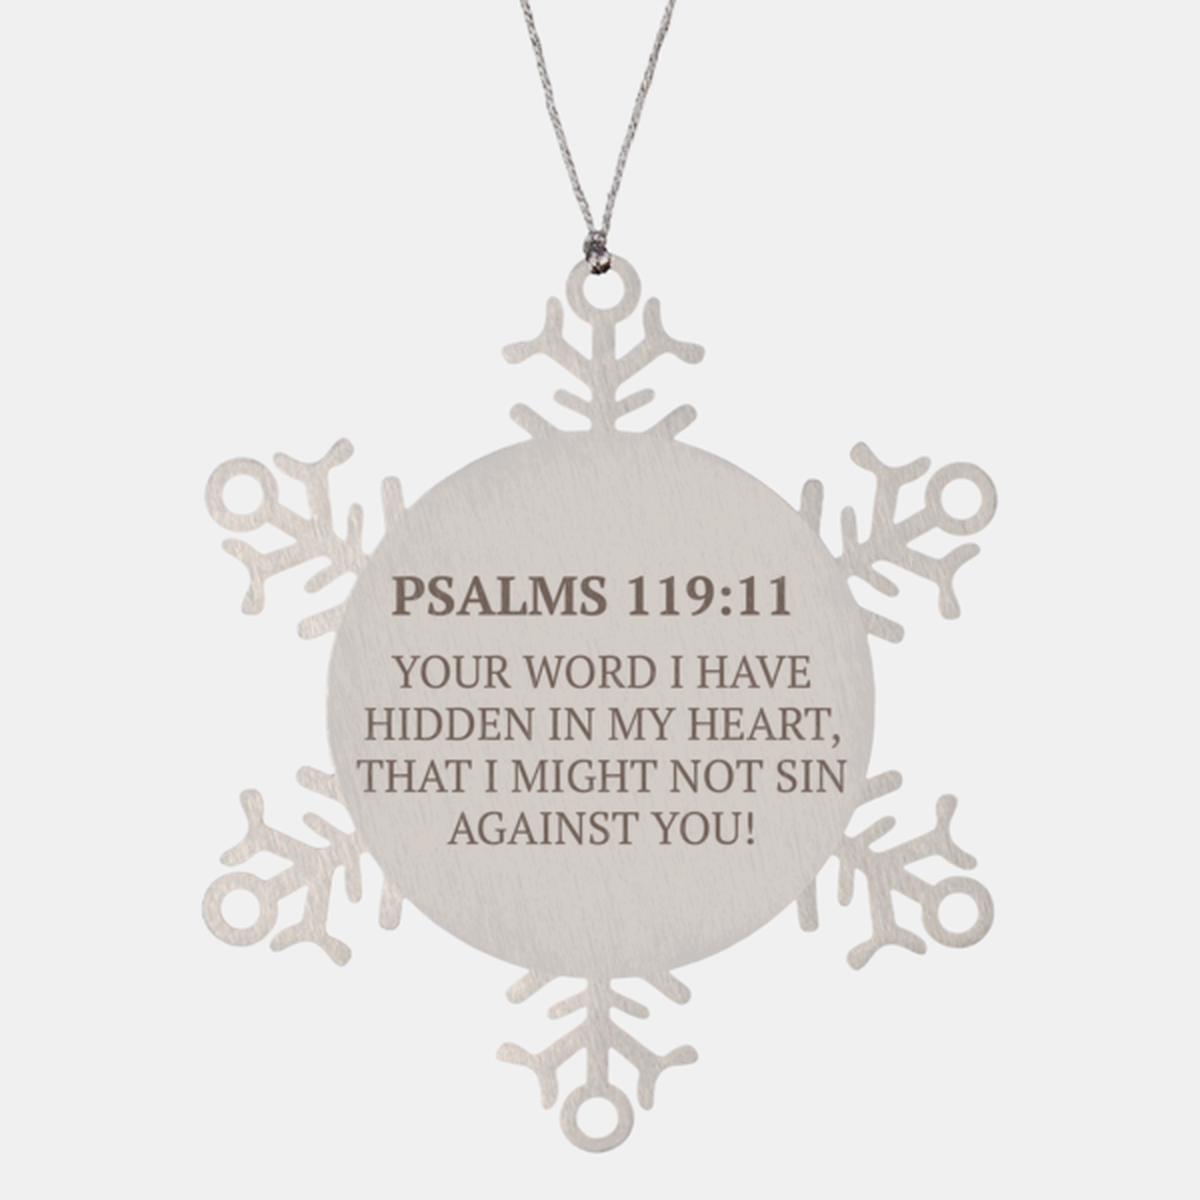 Christian Ornaments For Christmas Tree, Your Word I Have Hidden In My Heart, Religious Christmas Decorations, Scripture Ornaments Gifts, Bible Verse Ornament